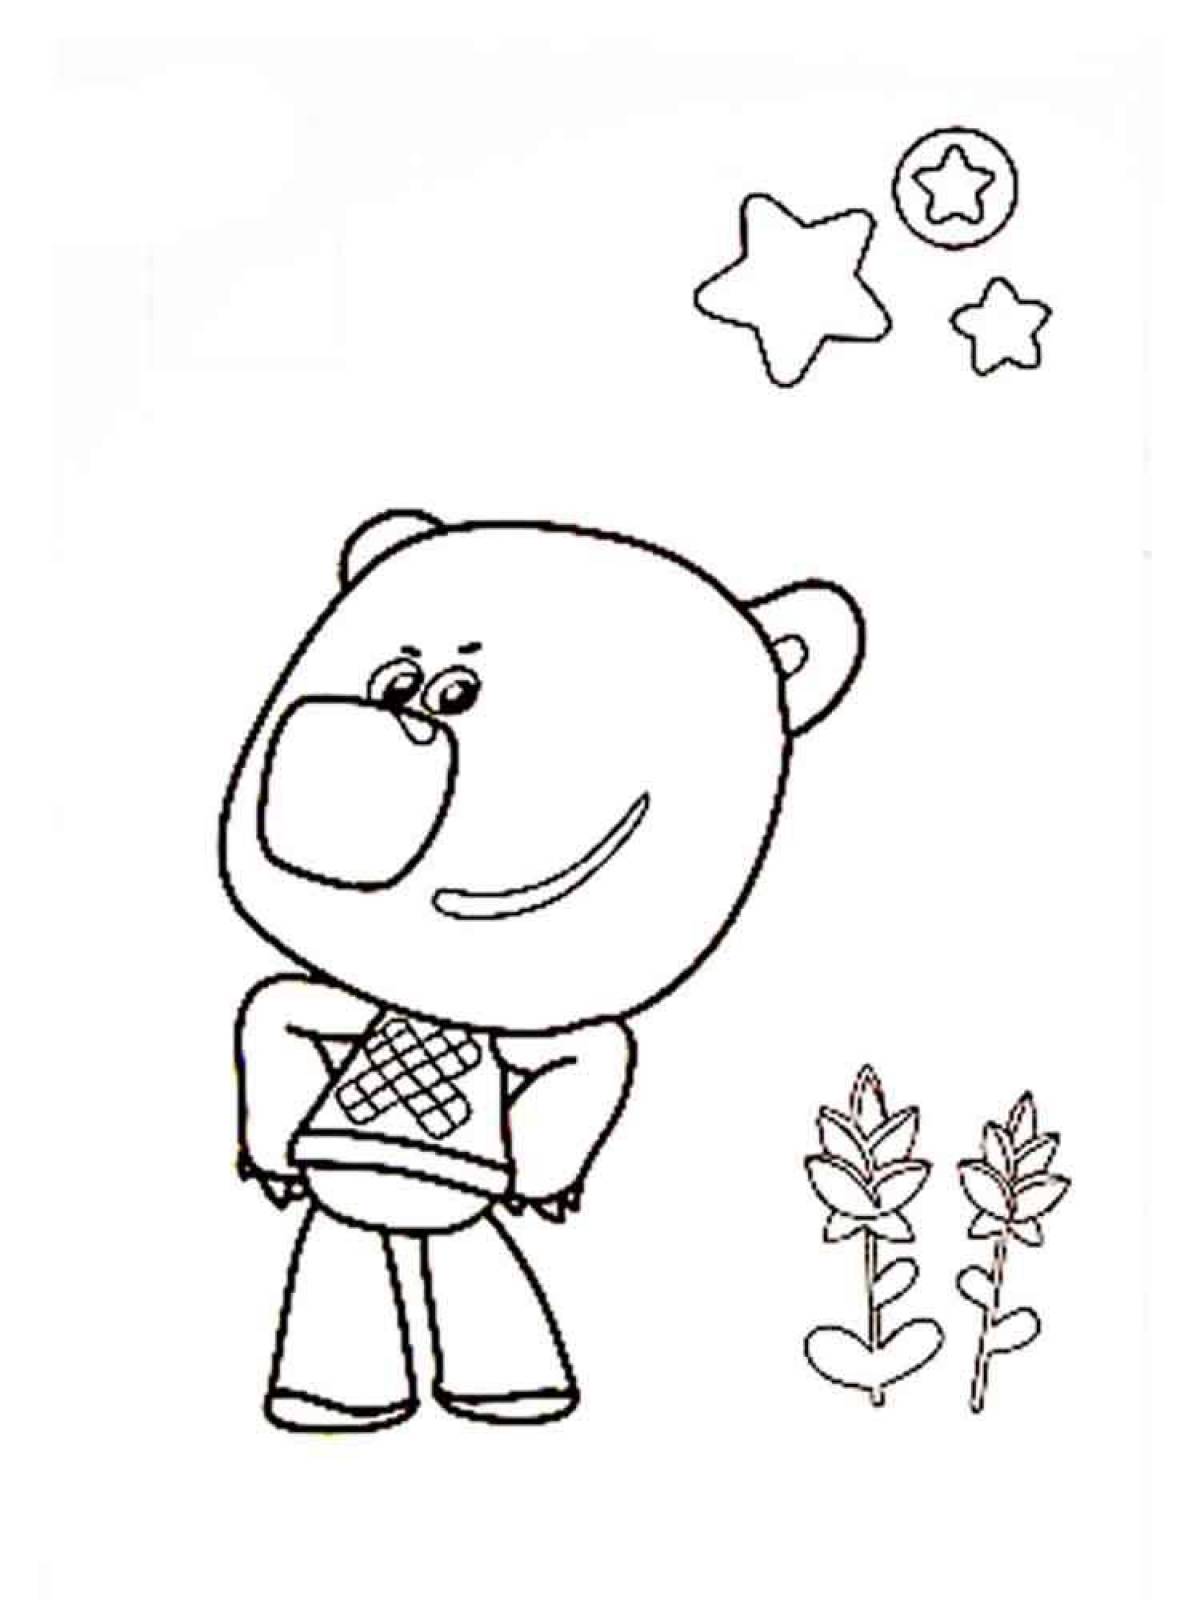 Friendly bear coloring pages